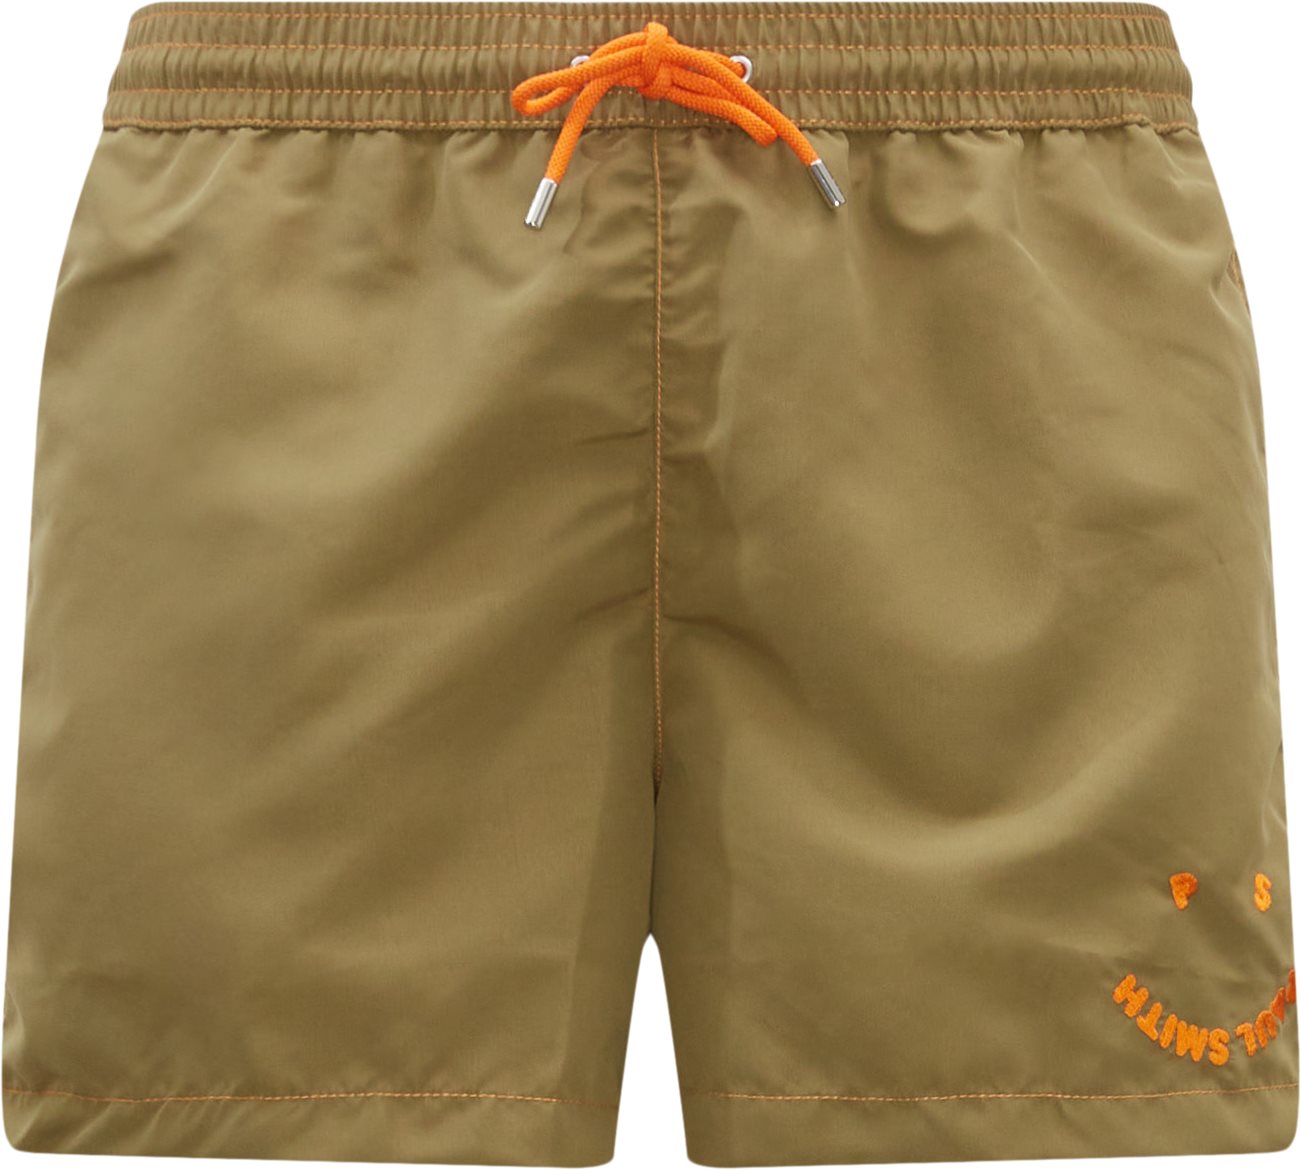 Paul Smith Accessories Shorts 201A HU286 Army